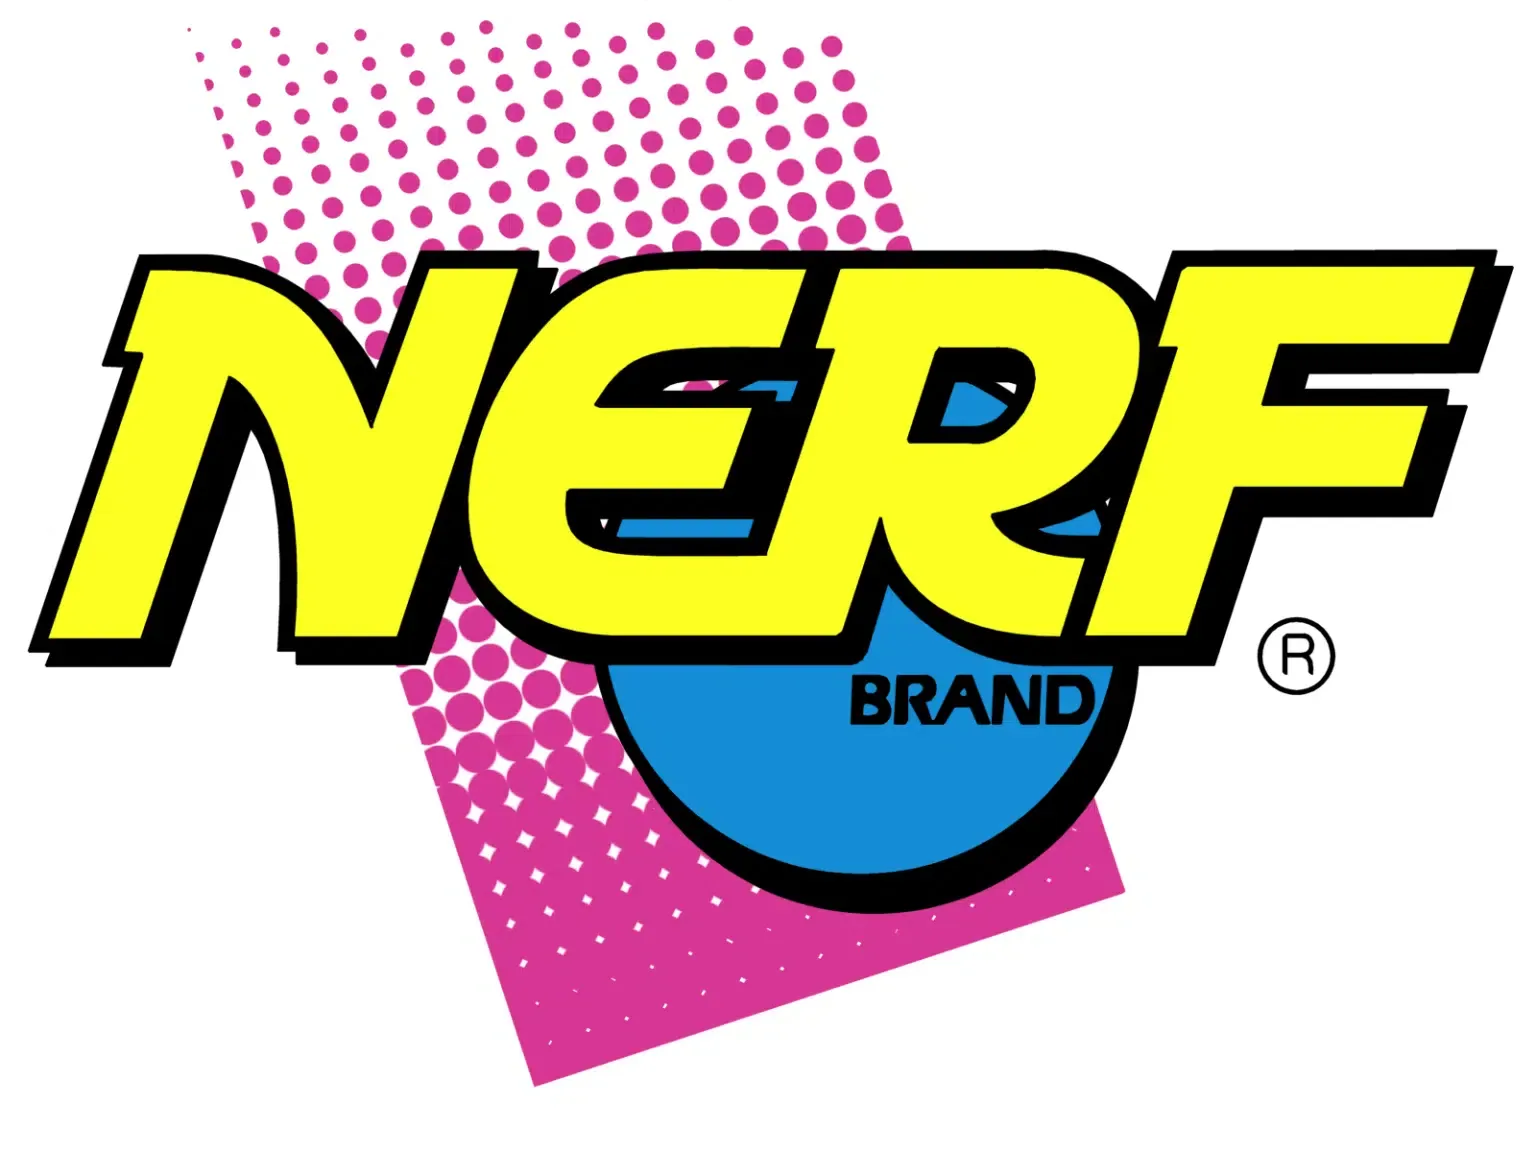 1992-1998: The Third Version Of The Nerf Logo